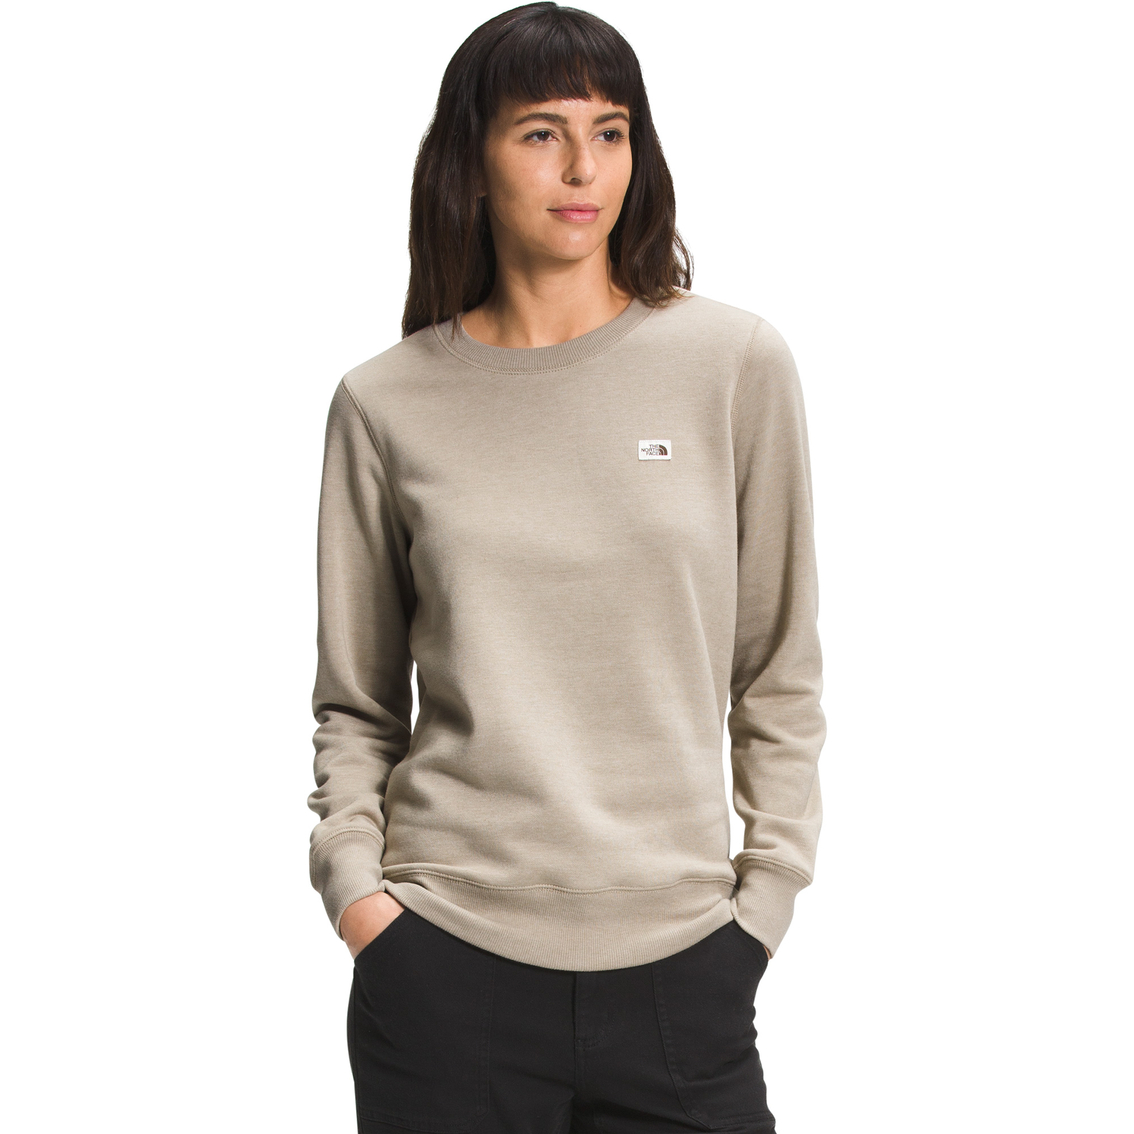 The North Face Heritage Patch Crew Sweatshirt | Hoodies & Sweatshirts |  Clothing & Accessories | Shop The Exchange